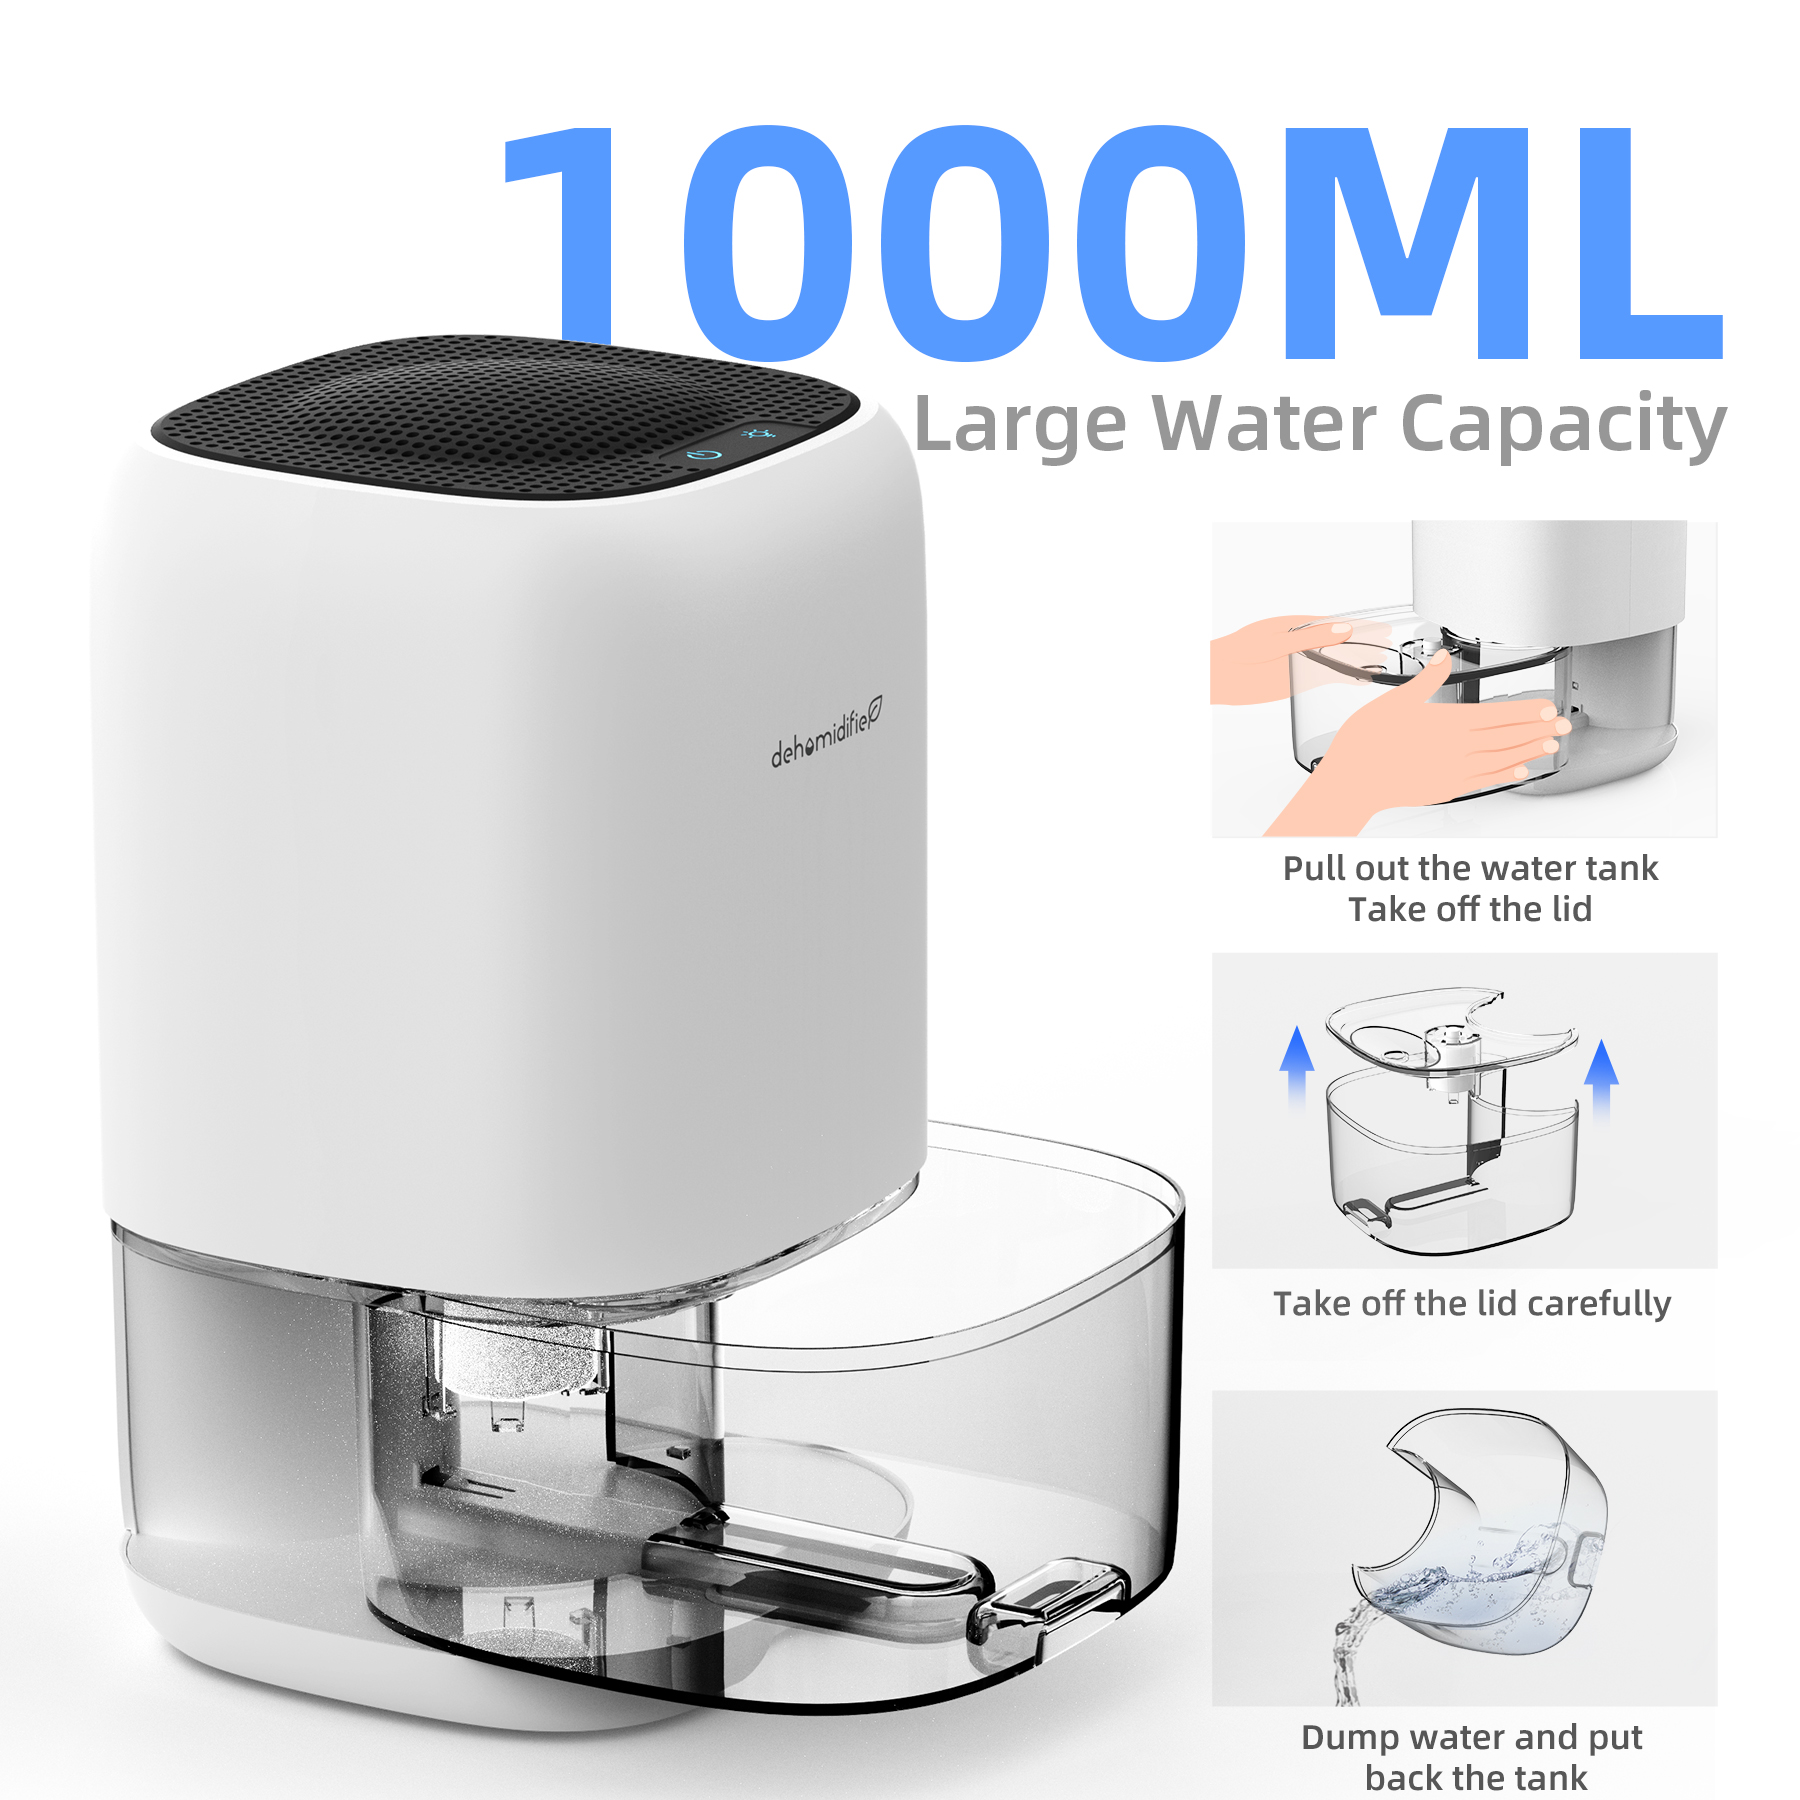 KLOUDIC Dehumidifier Portable and Ultra Quiet with Automatic Defrosting for Home 1000ML(2200 Cubic Feet) - image 4 of 8